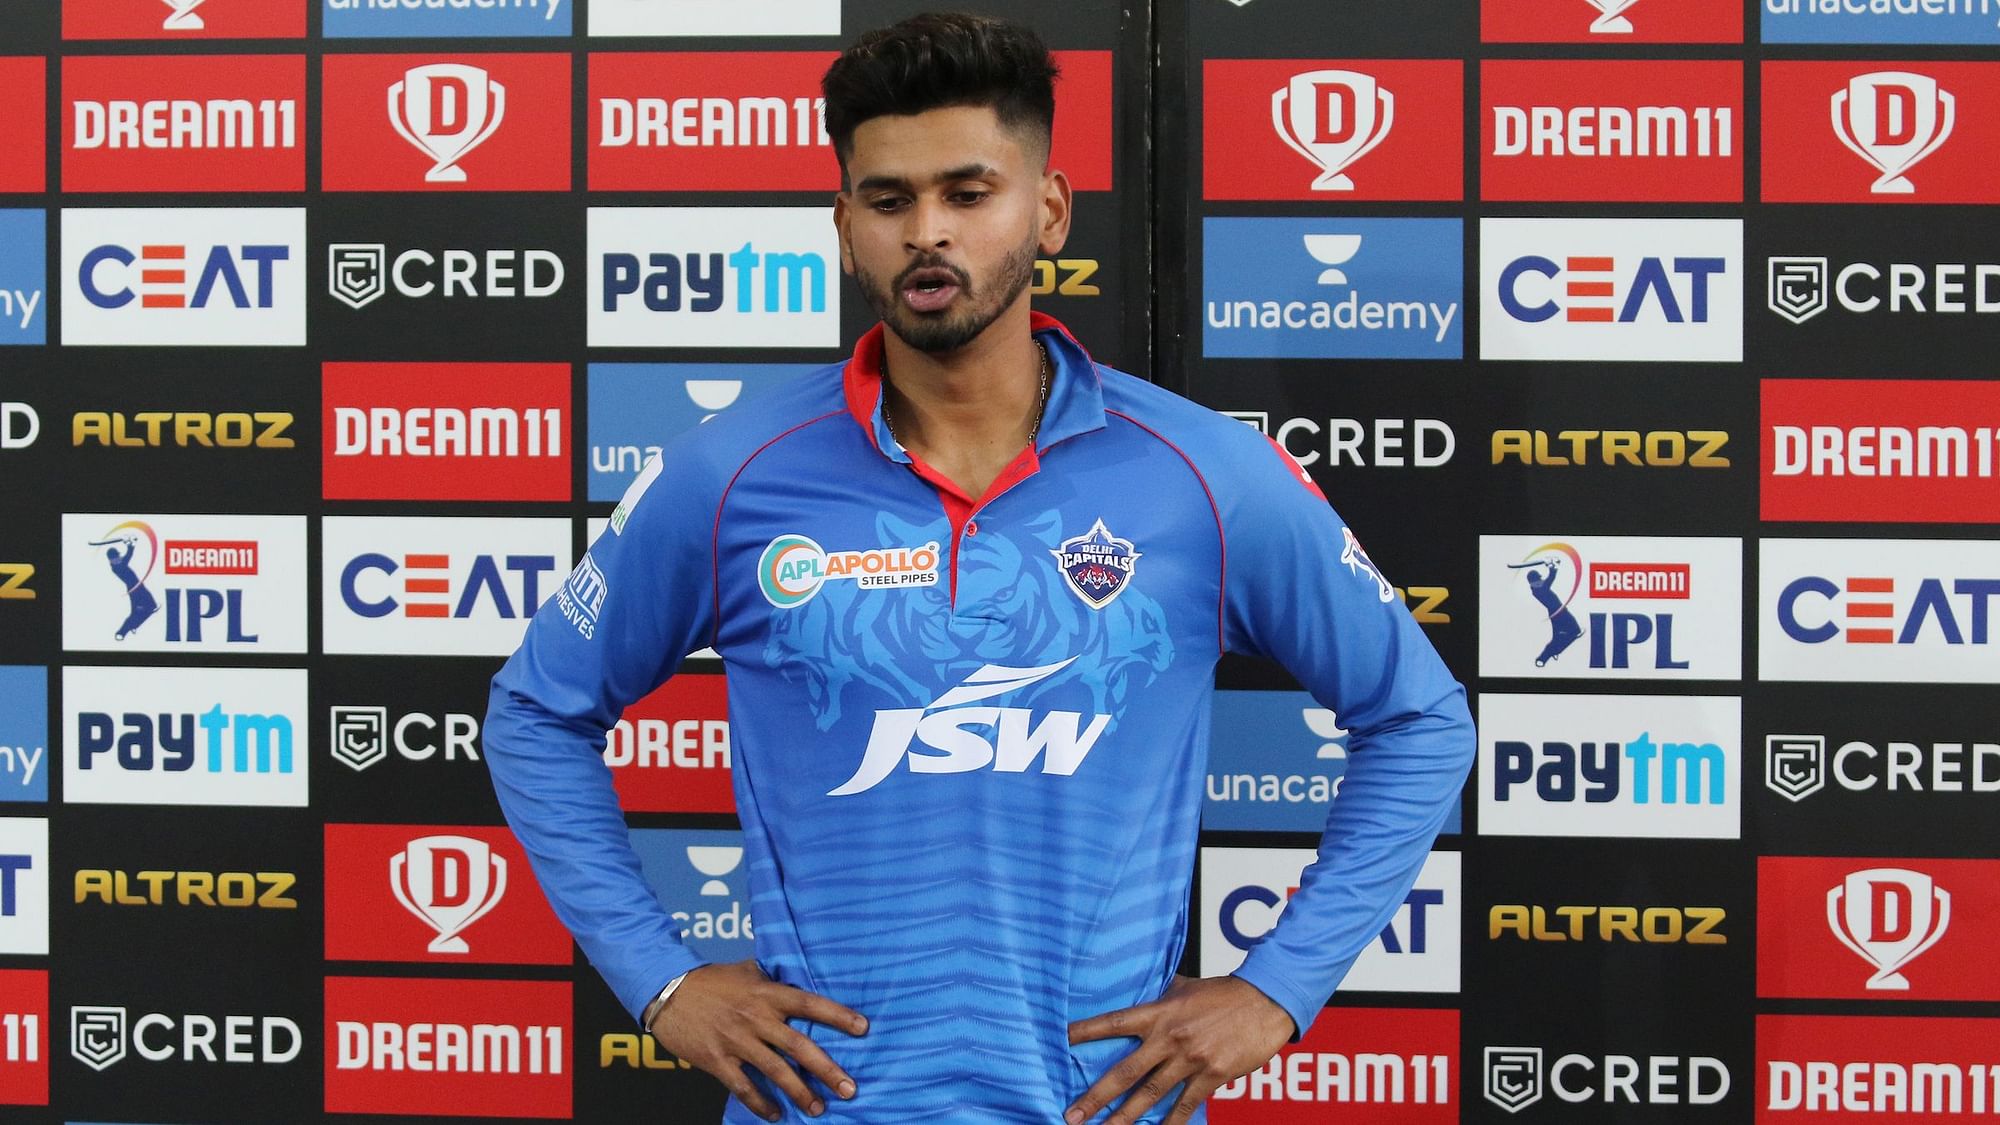 Delhi Capitals skipper Shreyas Iyer said that they were outplayed by the Kolkata Knight Riders after his side’s 59-run loss